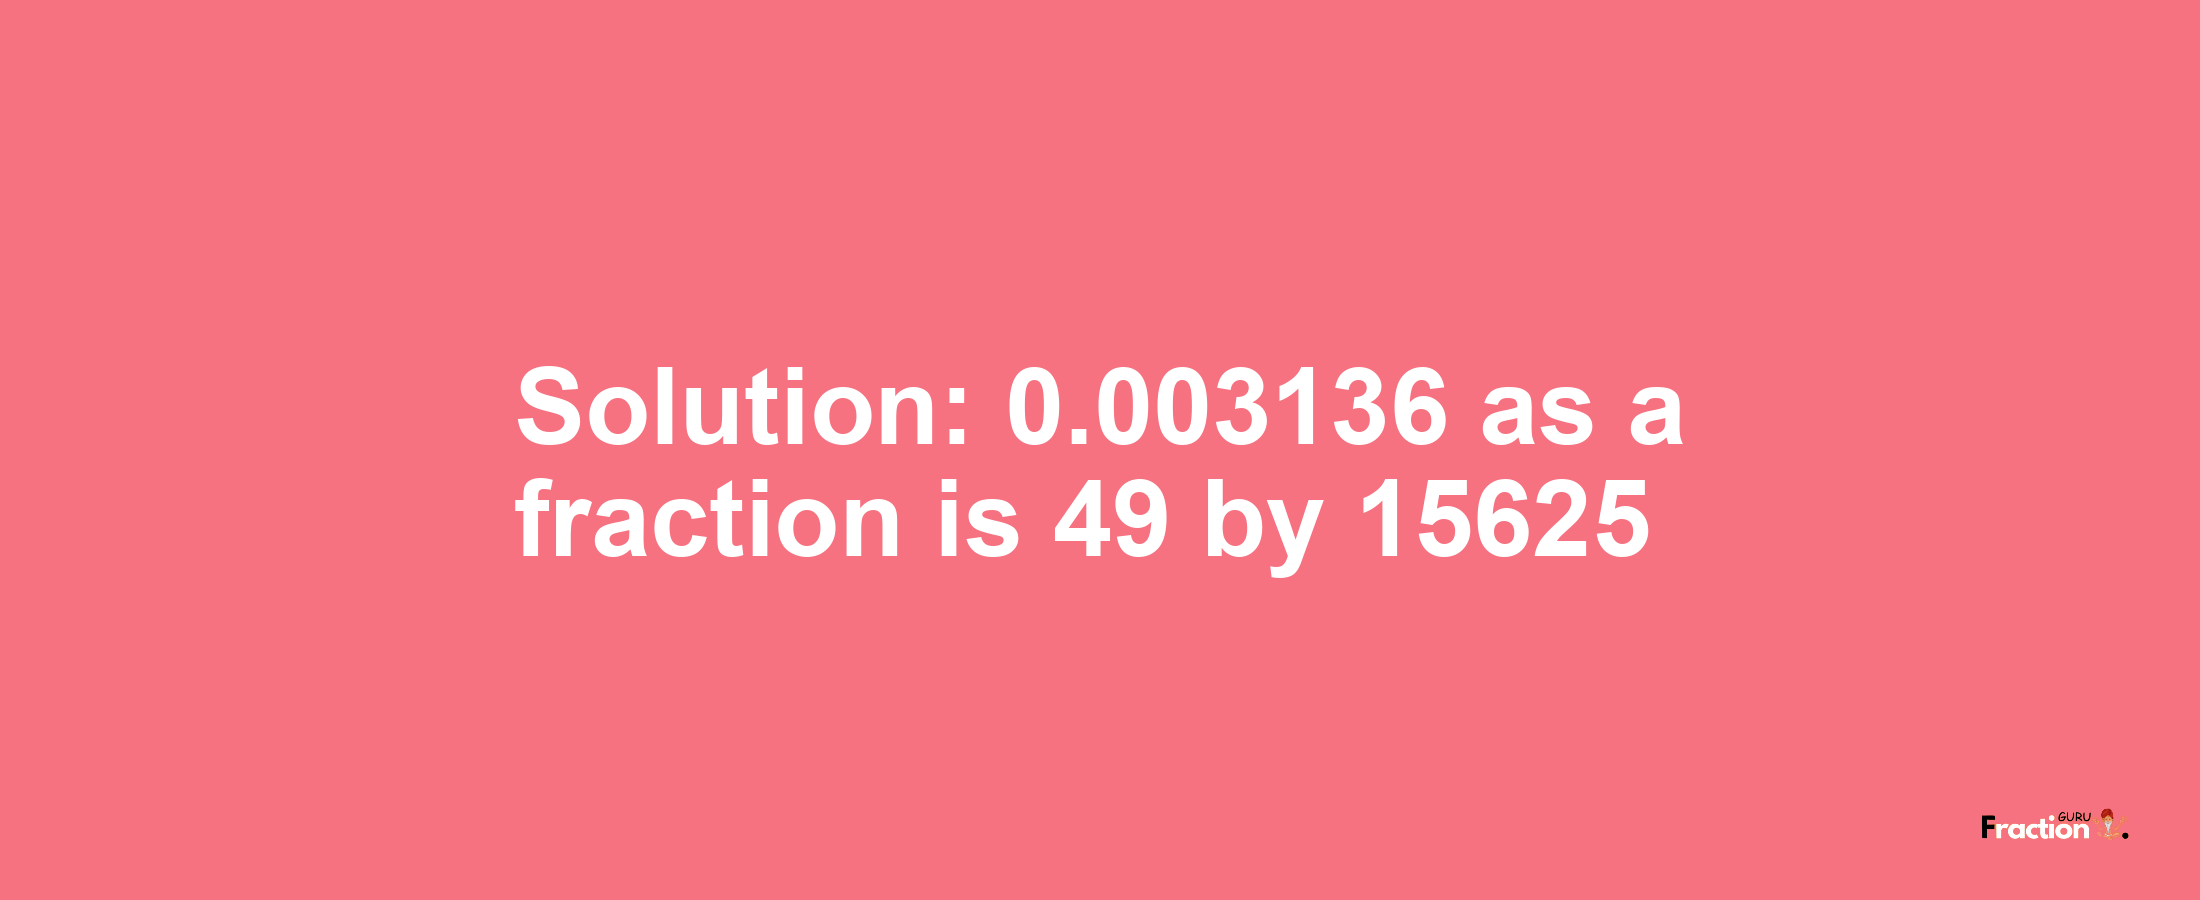 Solution:0.003136 as a fraction is 49/15625